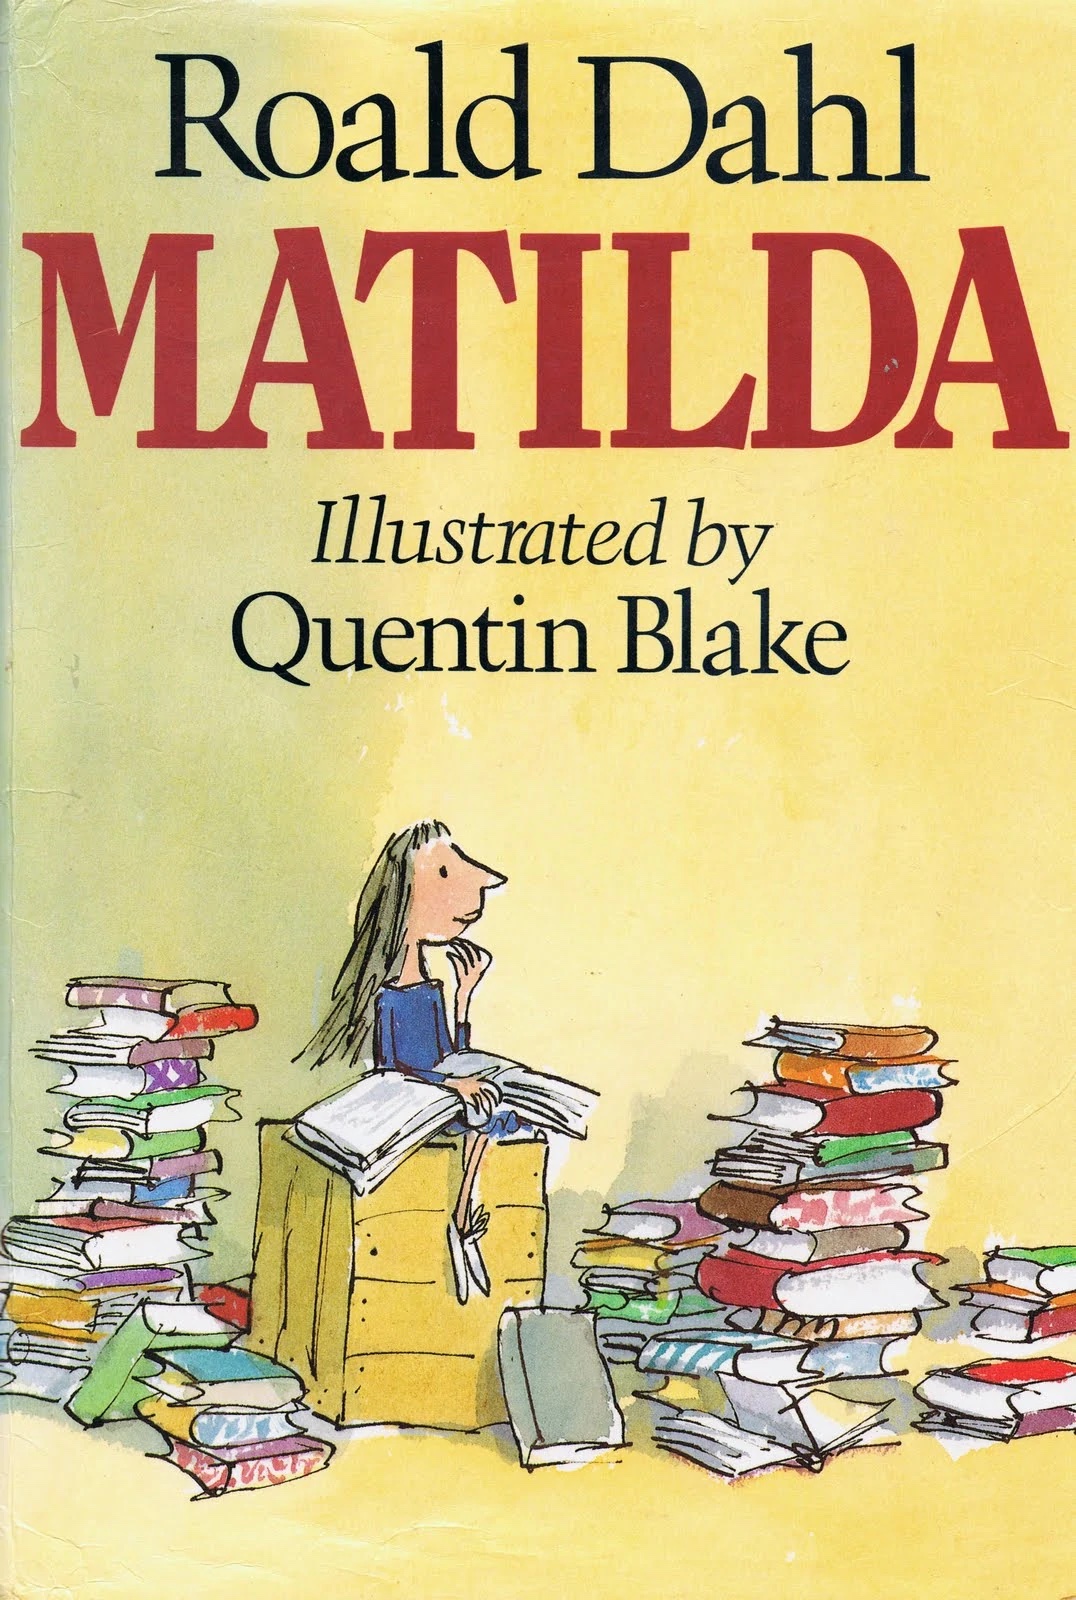 One of the many Matilda book covers